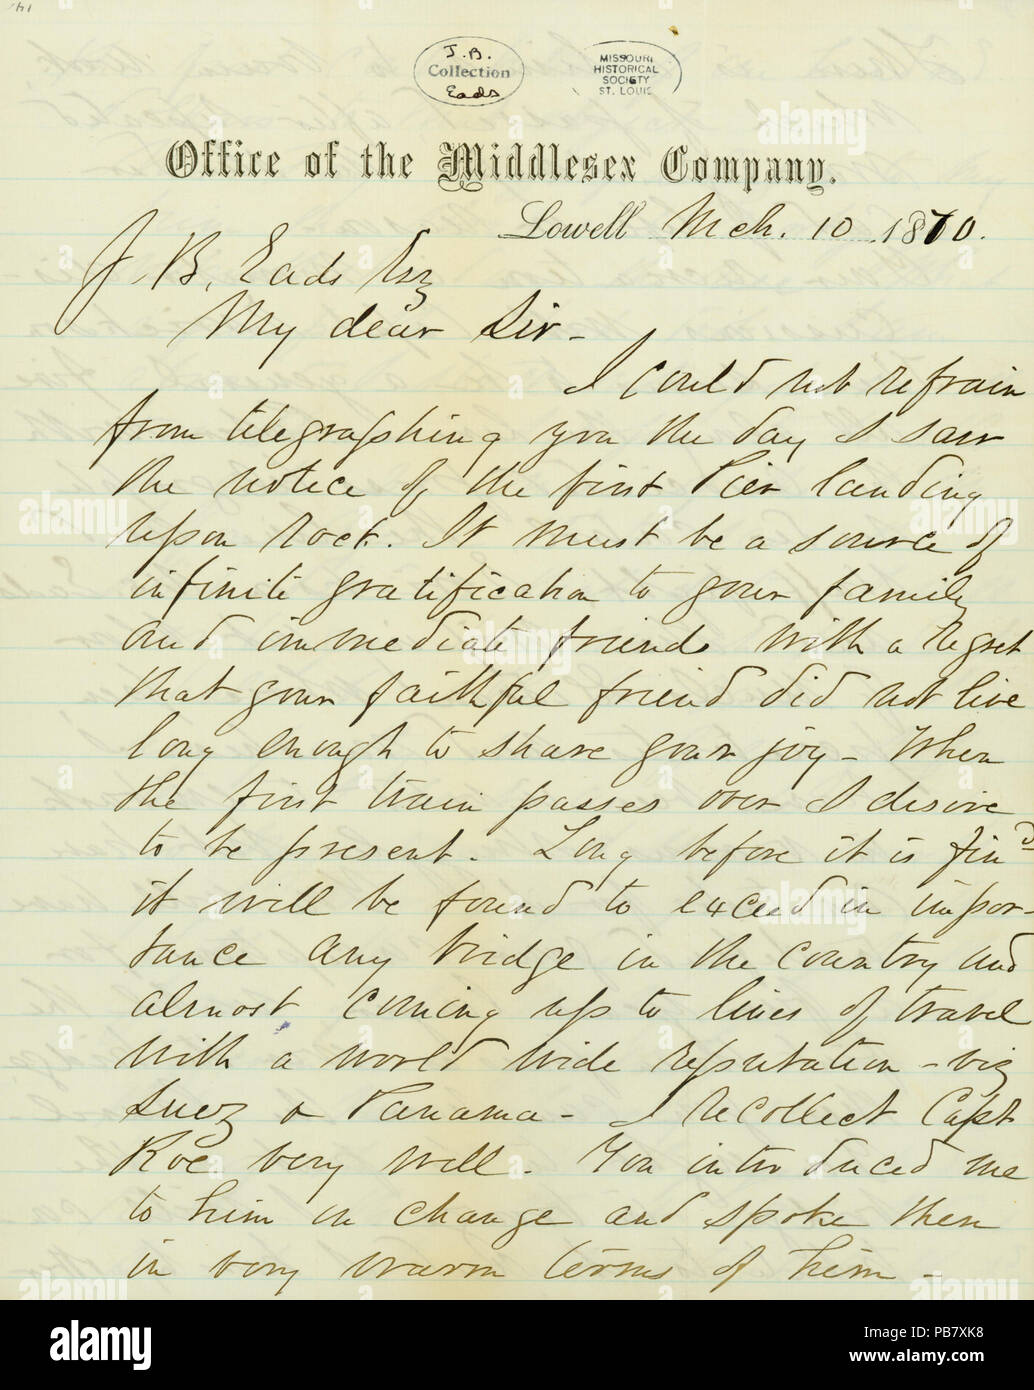 907 Letter signed G.V. Fox, Office of the Middlesex Company, Lowell, to J.B. Eads, March 10, 1870 Stock Photo